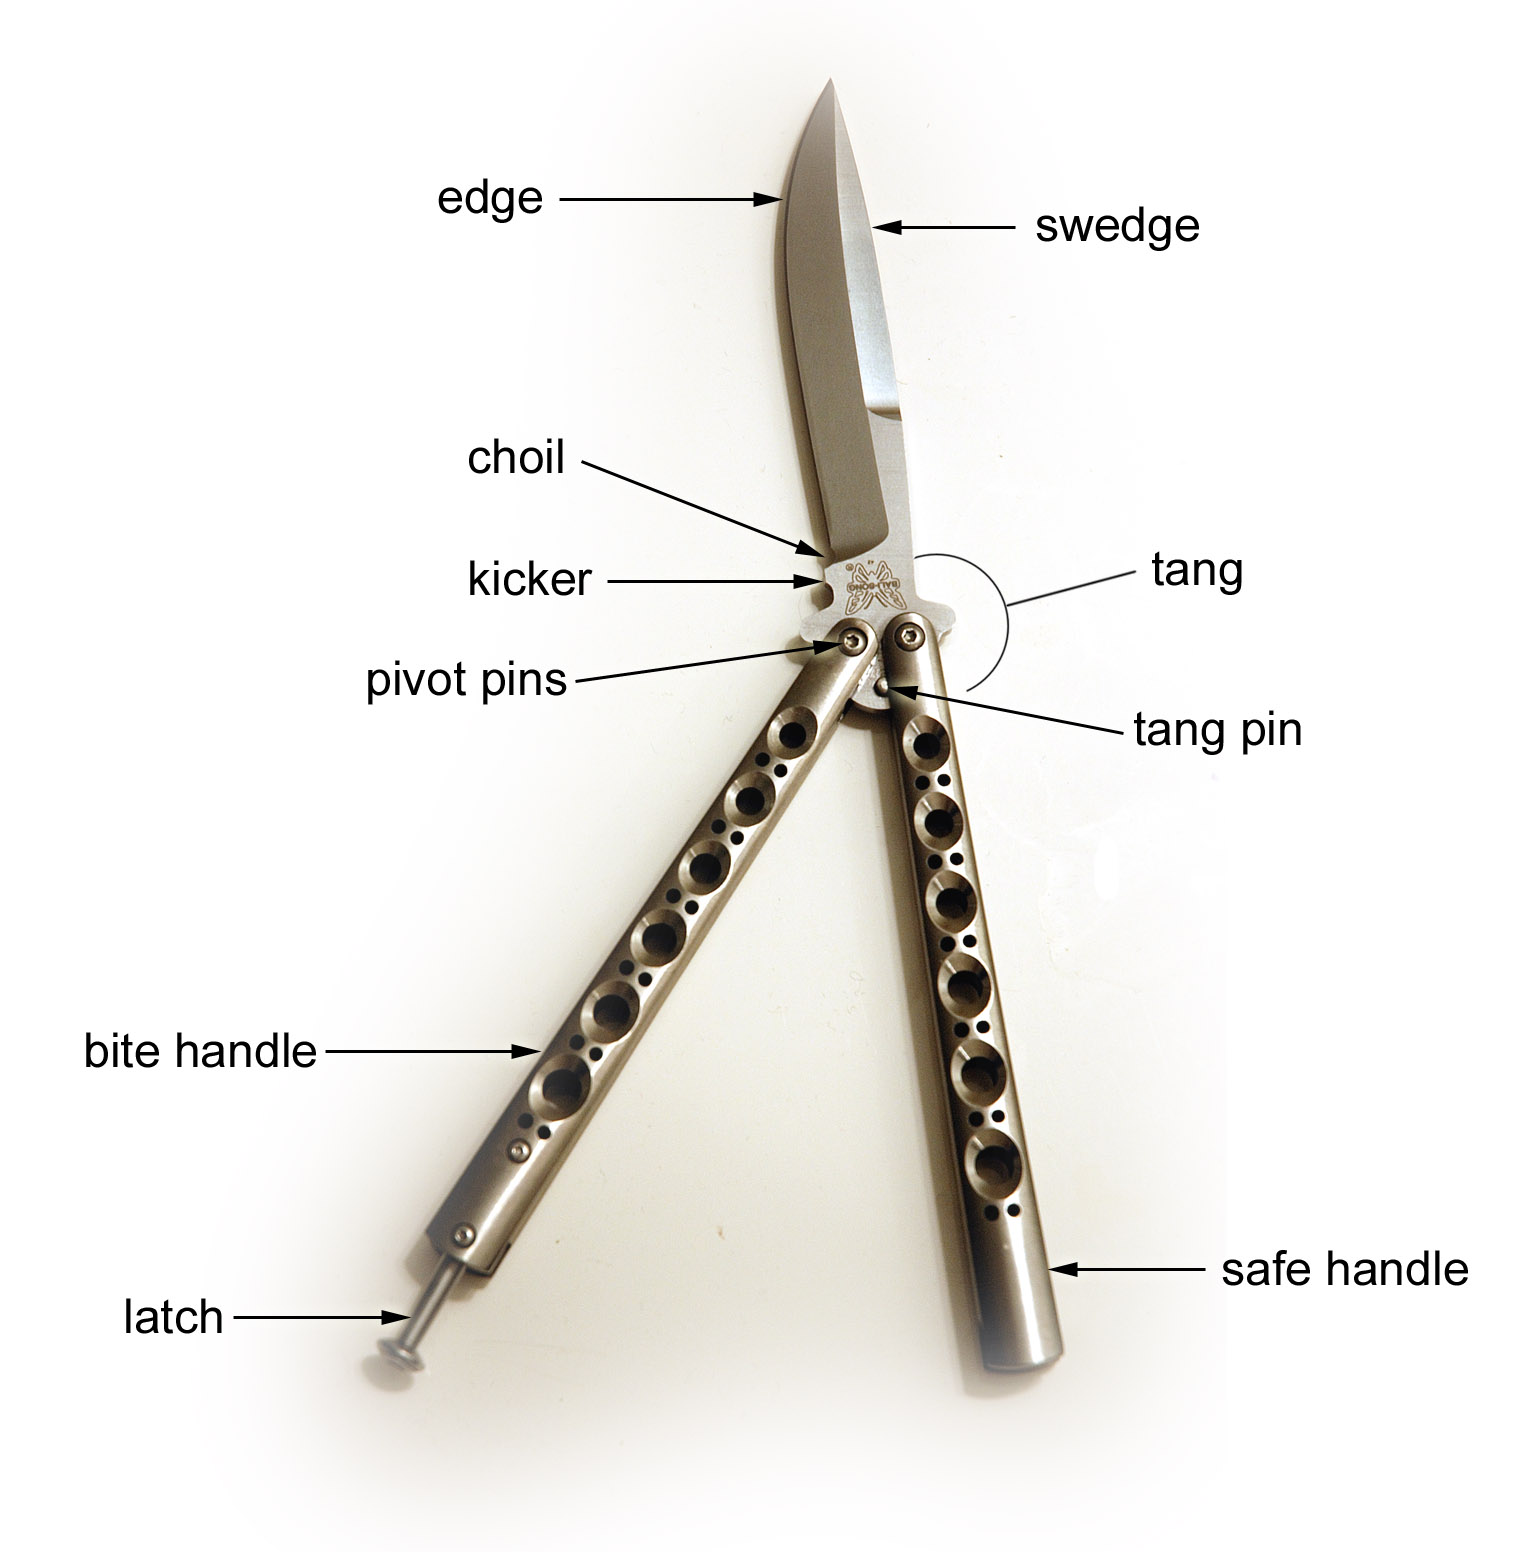 File Parts Of A Balisong3 Jpg Wikimedia Mons